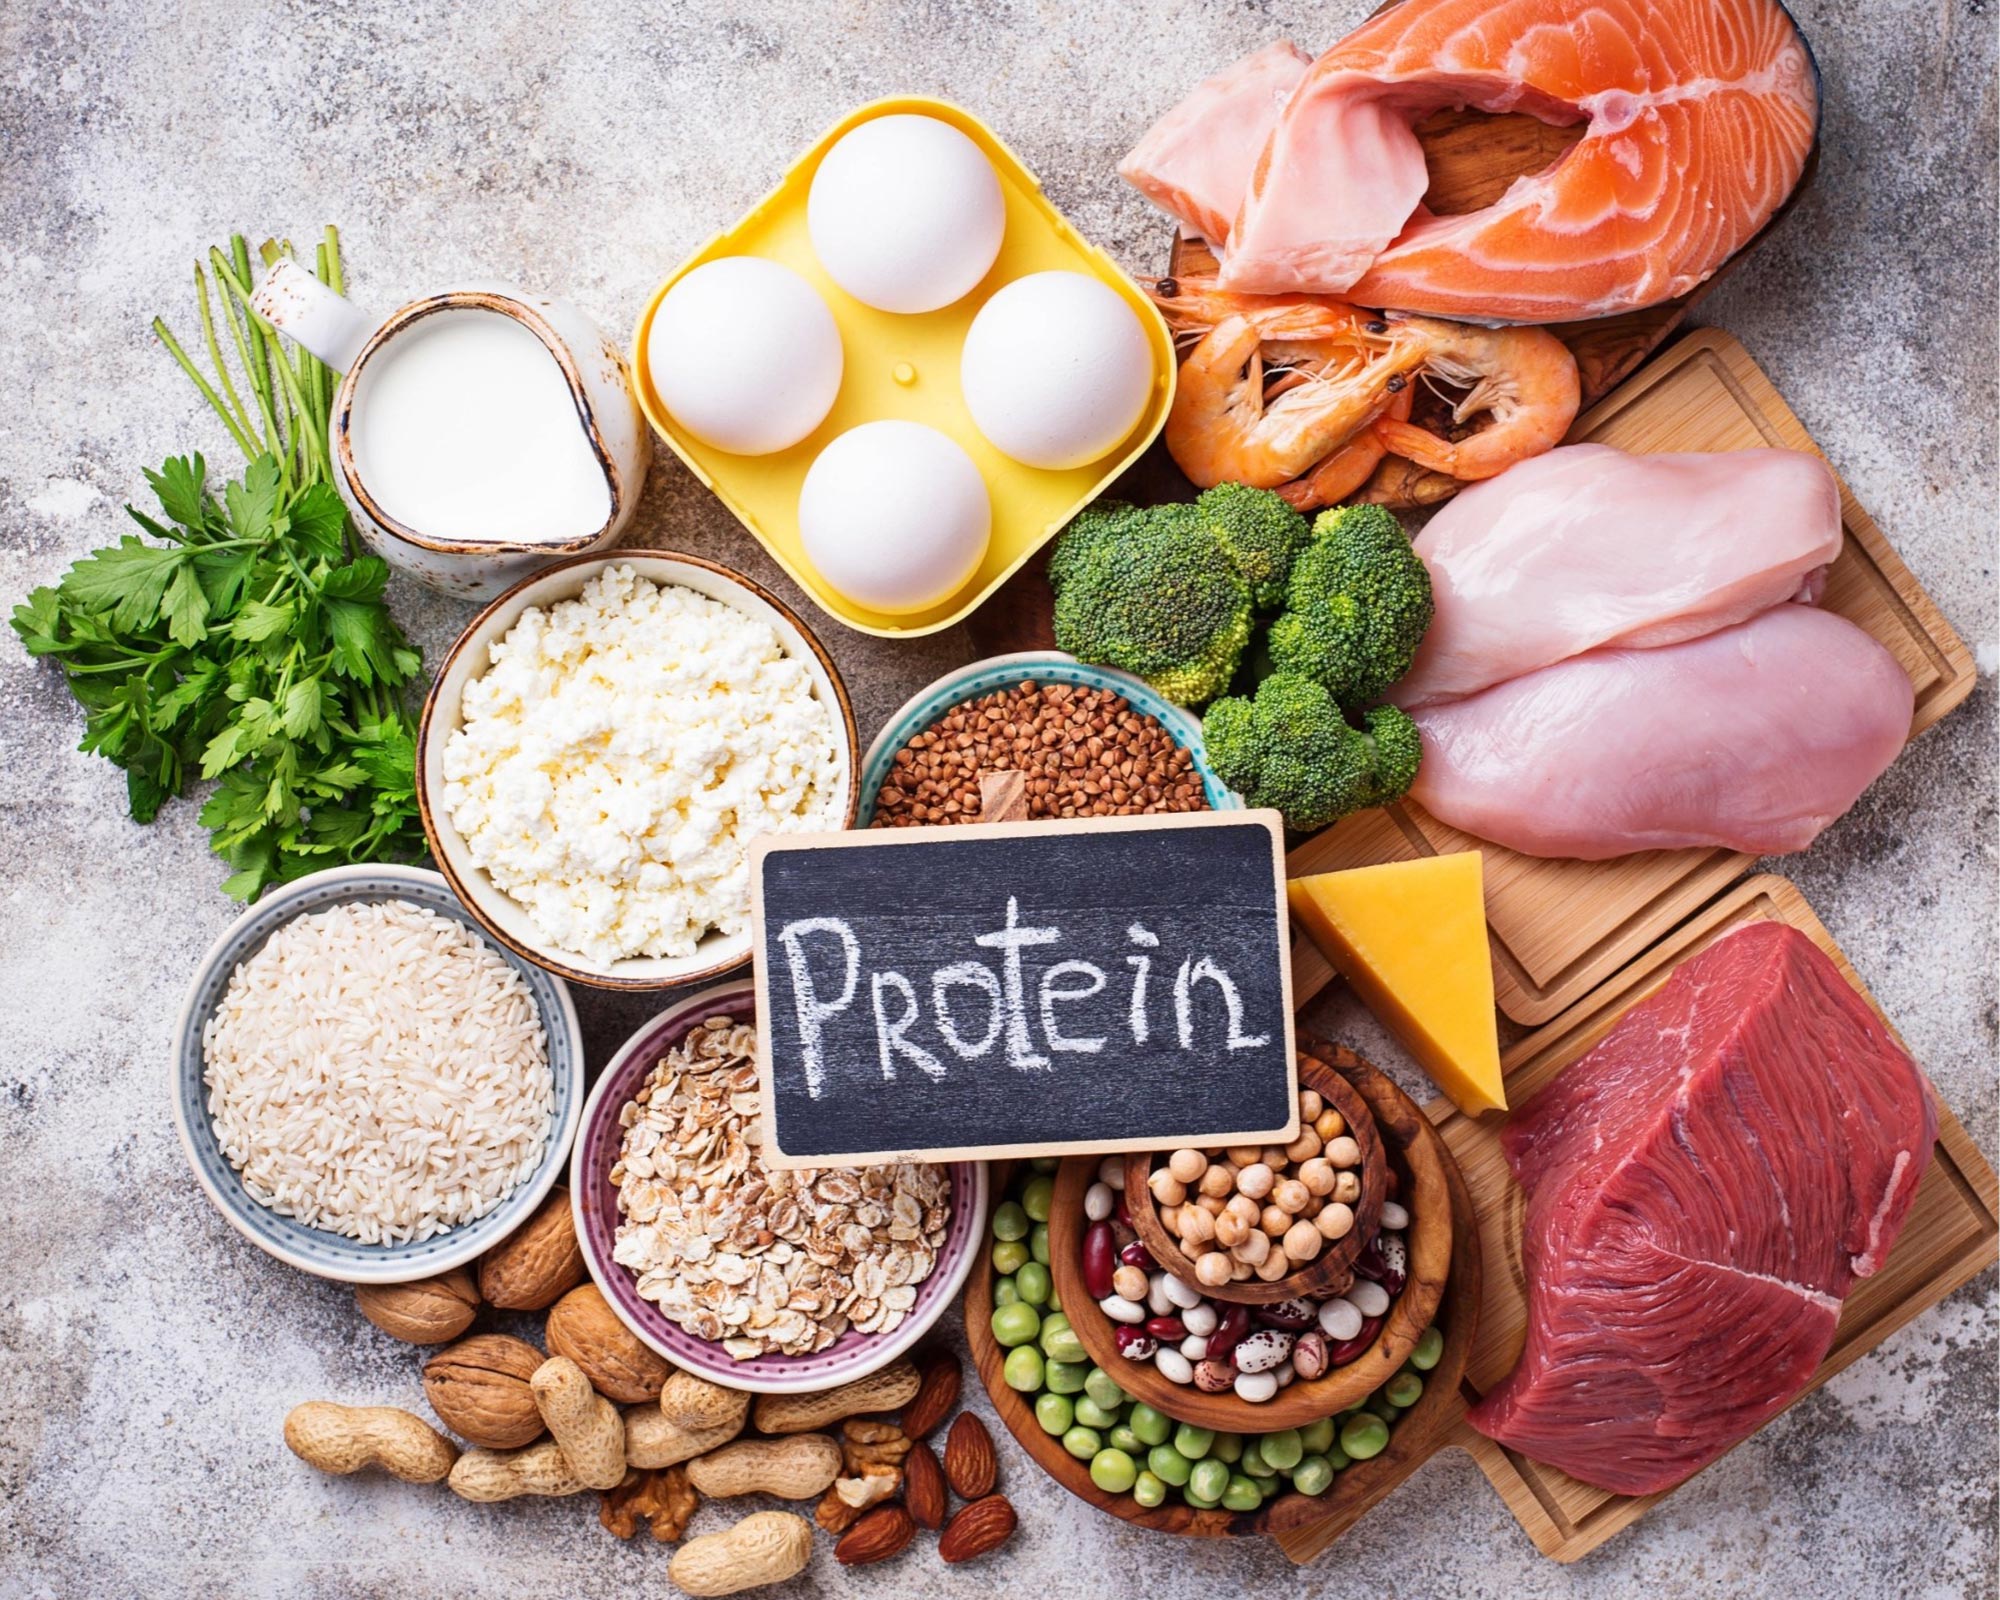 Scientists Shed New Light on the Protein Diet Paradox - SciTechDaily